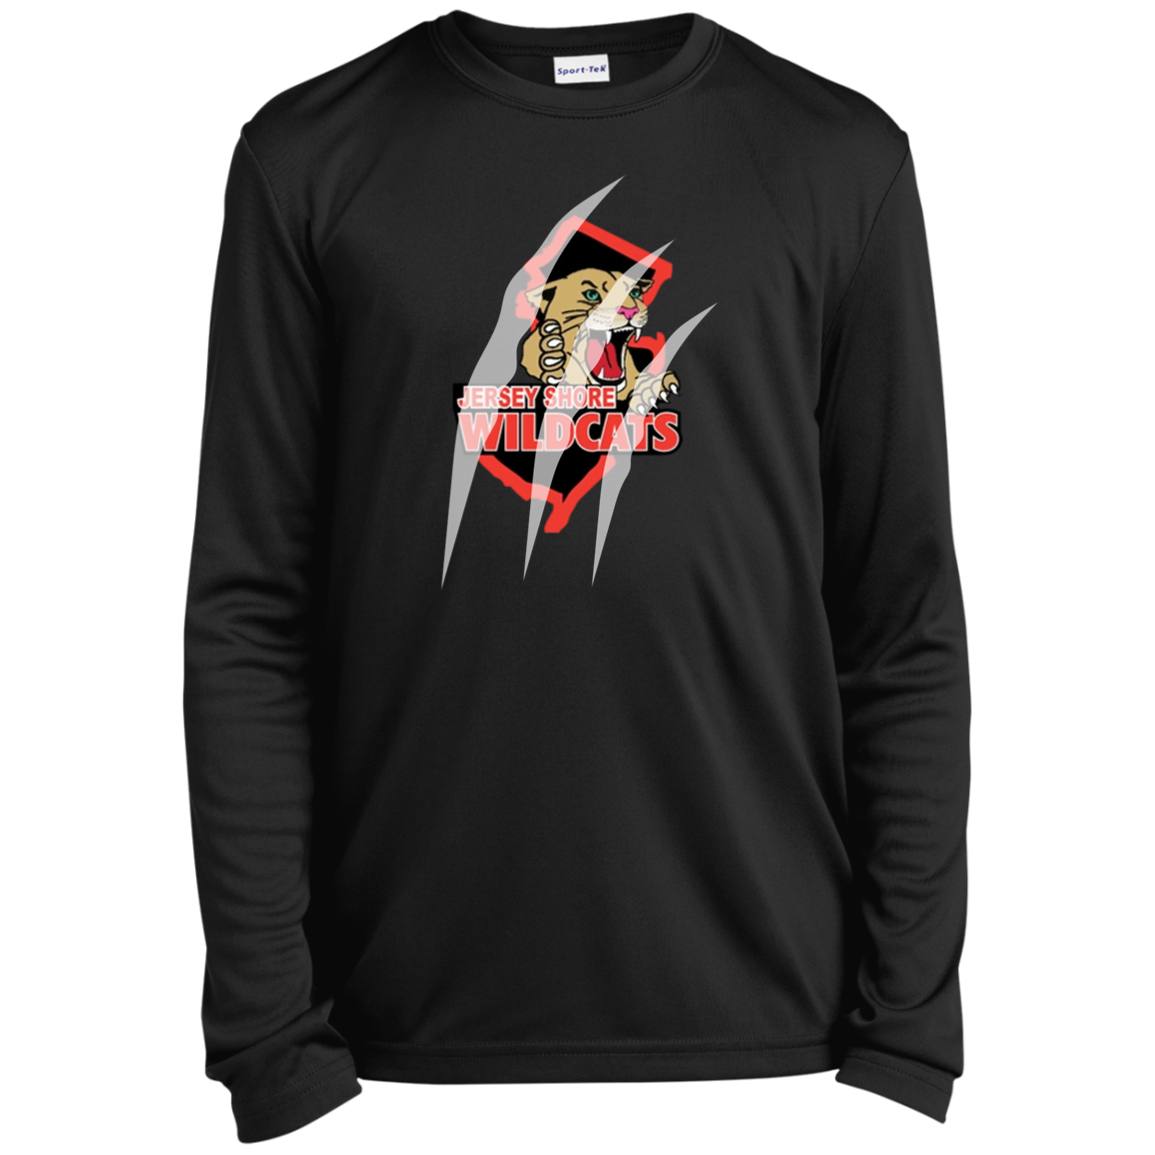 Claw Marks WIldcats Youth Long Sleeve Performance Tee